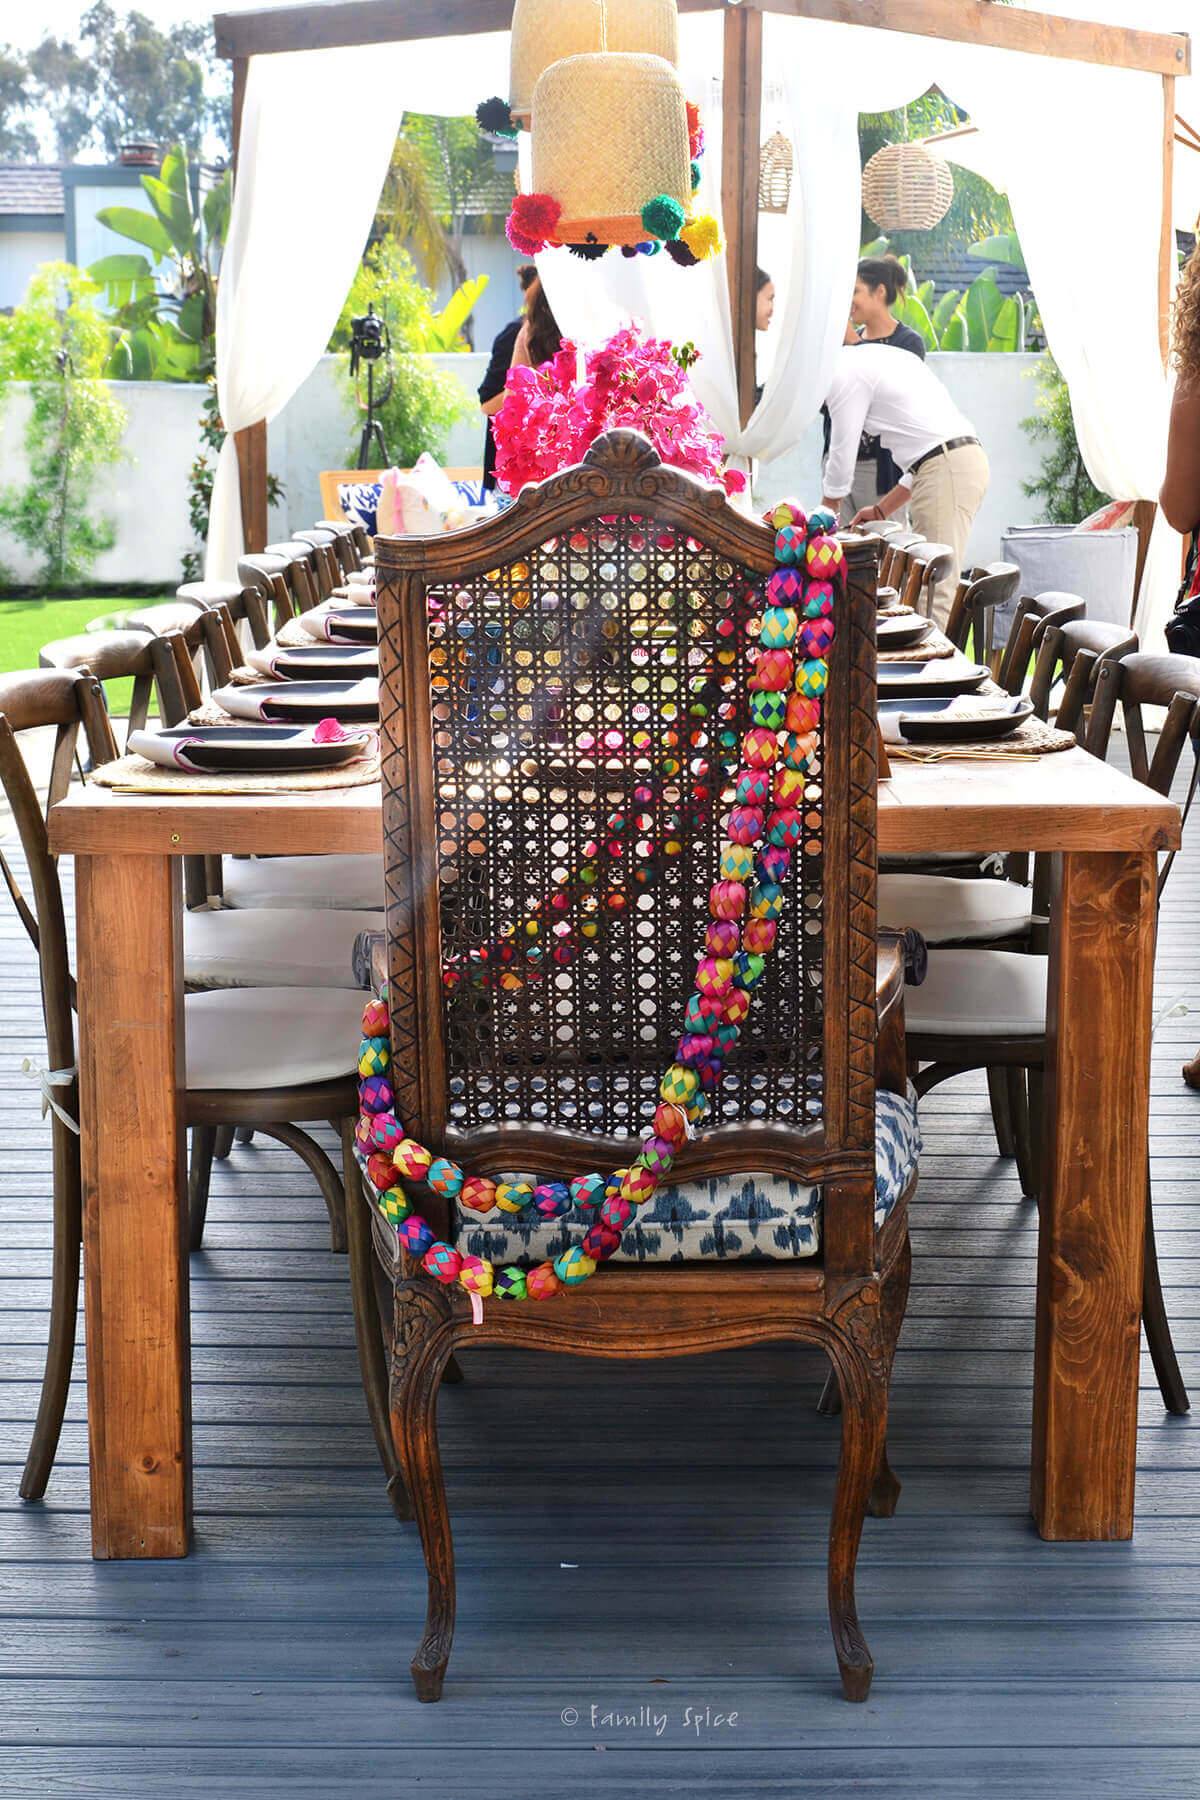 A decorated dining table setup outside with Mexican embellishments